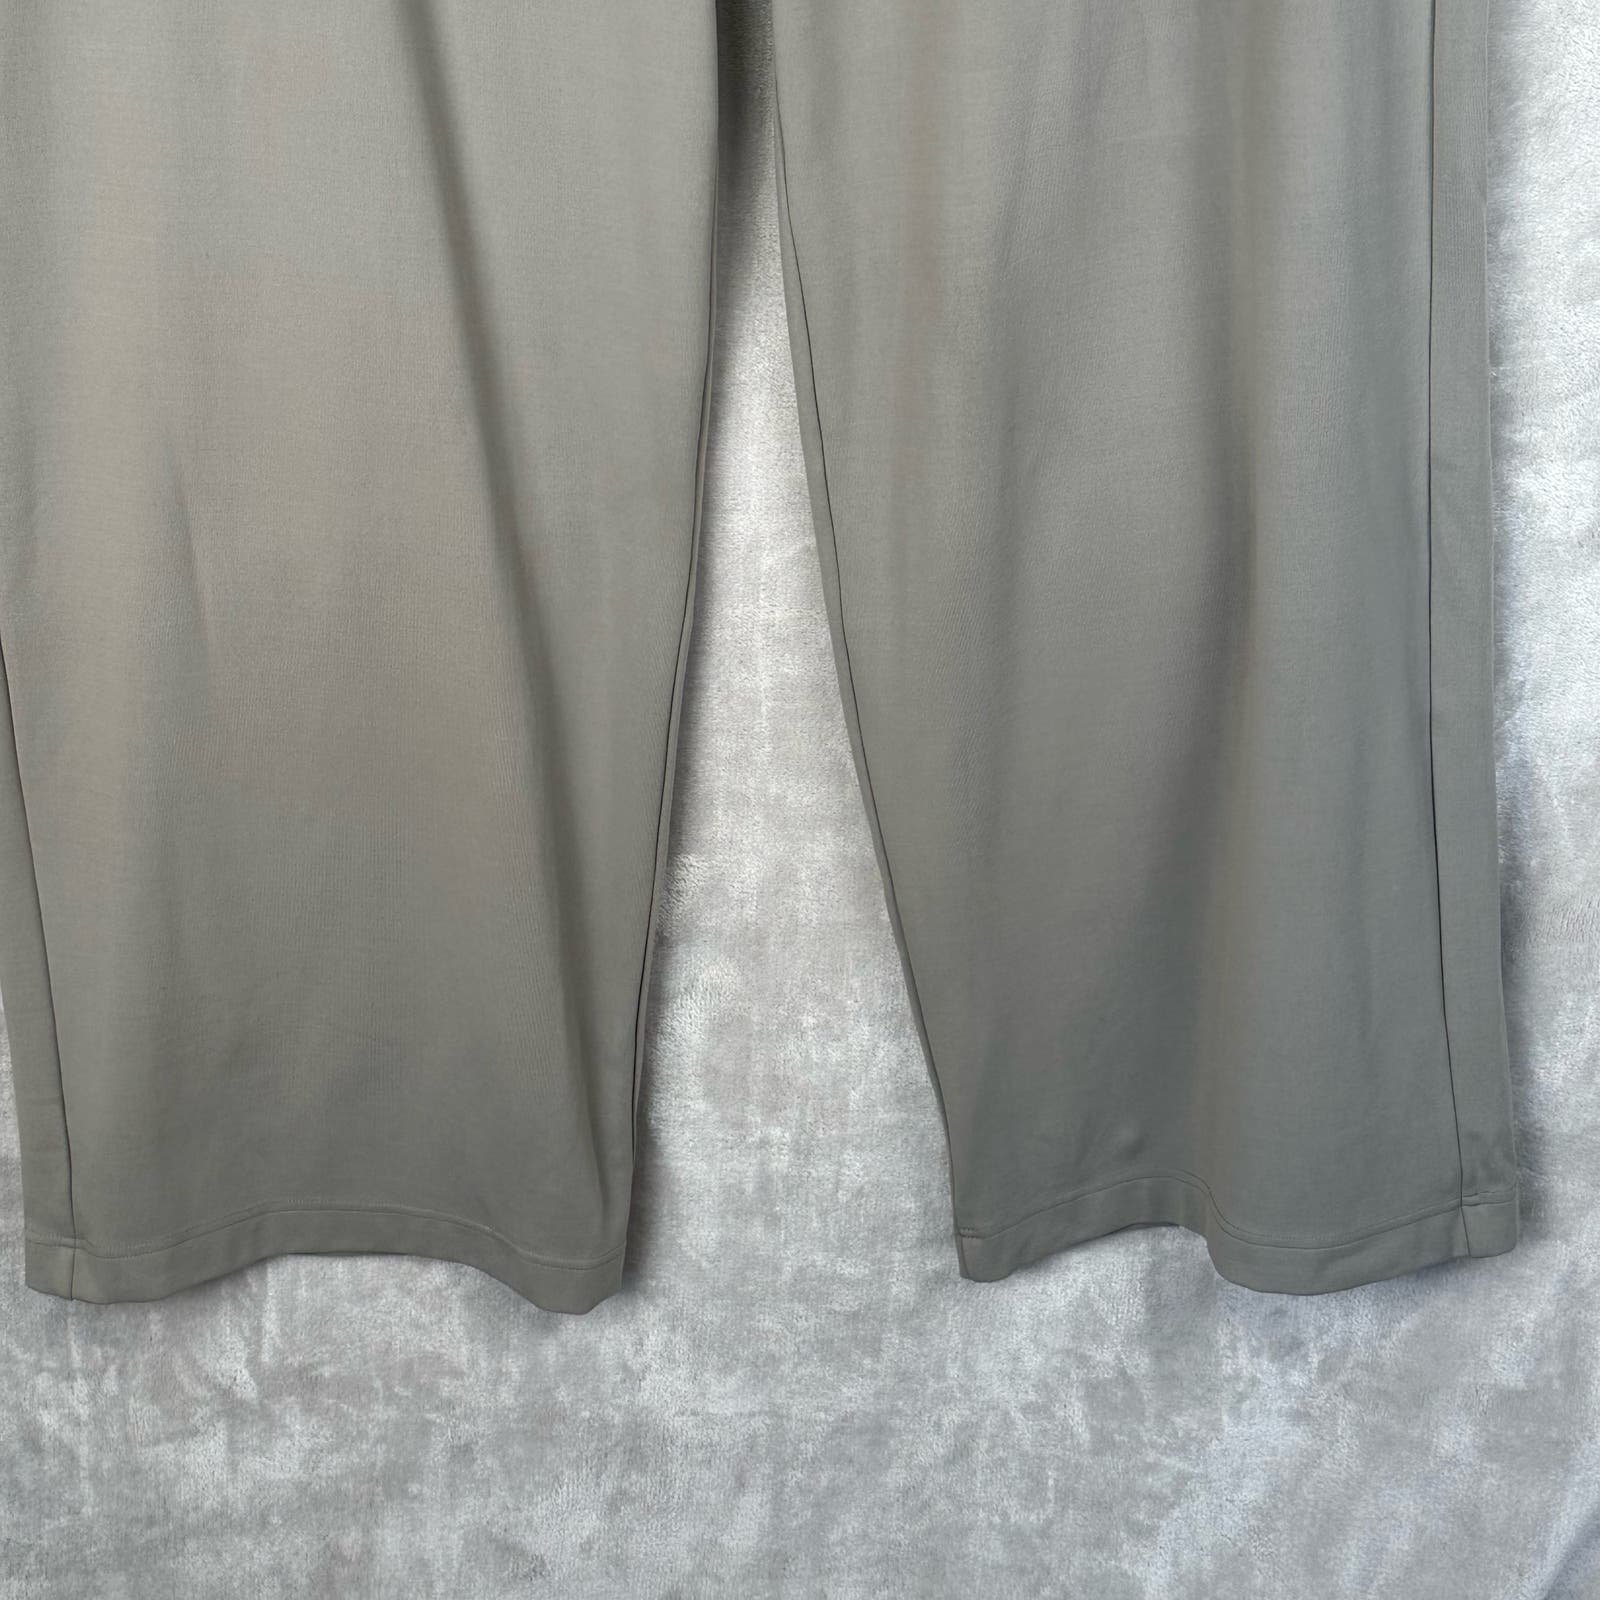 Comfortable Athleta Pants Womens Extra Large Gray Wide Leg Pull On Pockets Stretch Comfort Fw85E5iaZ just buy it